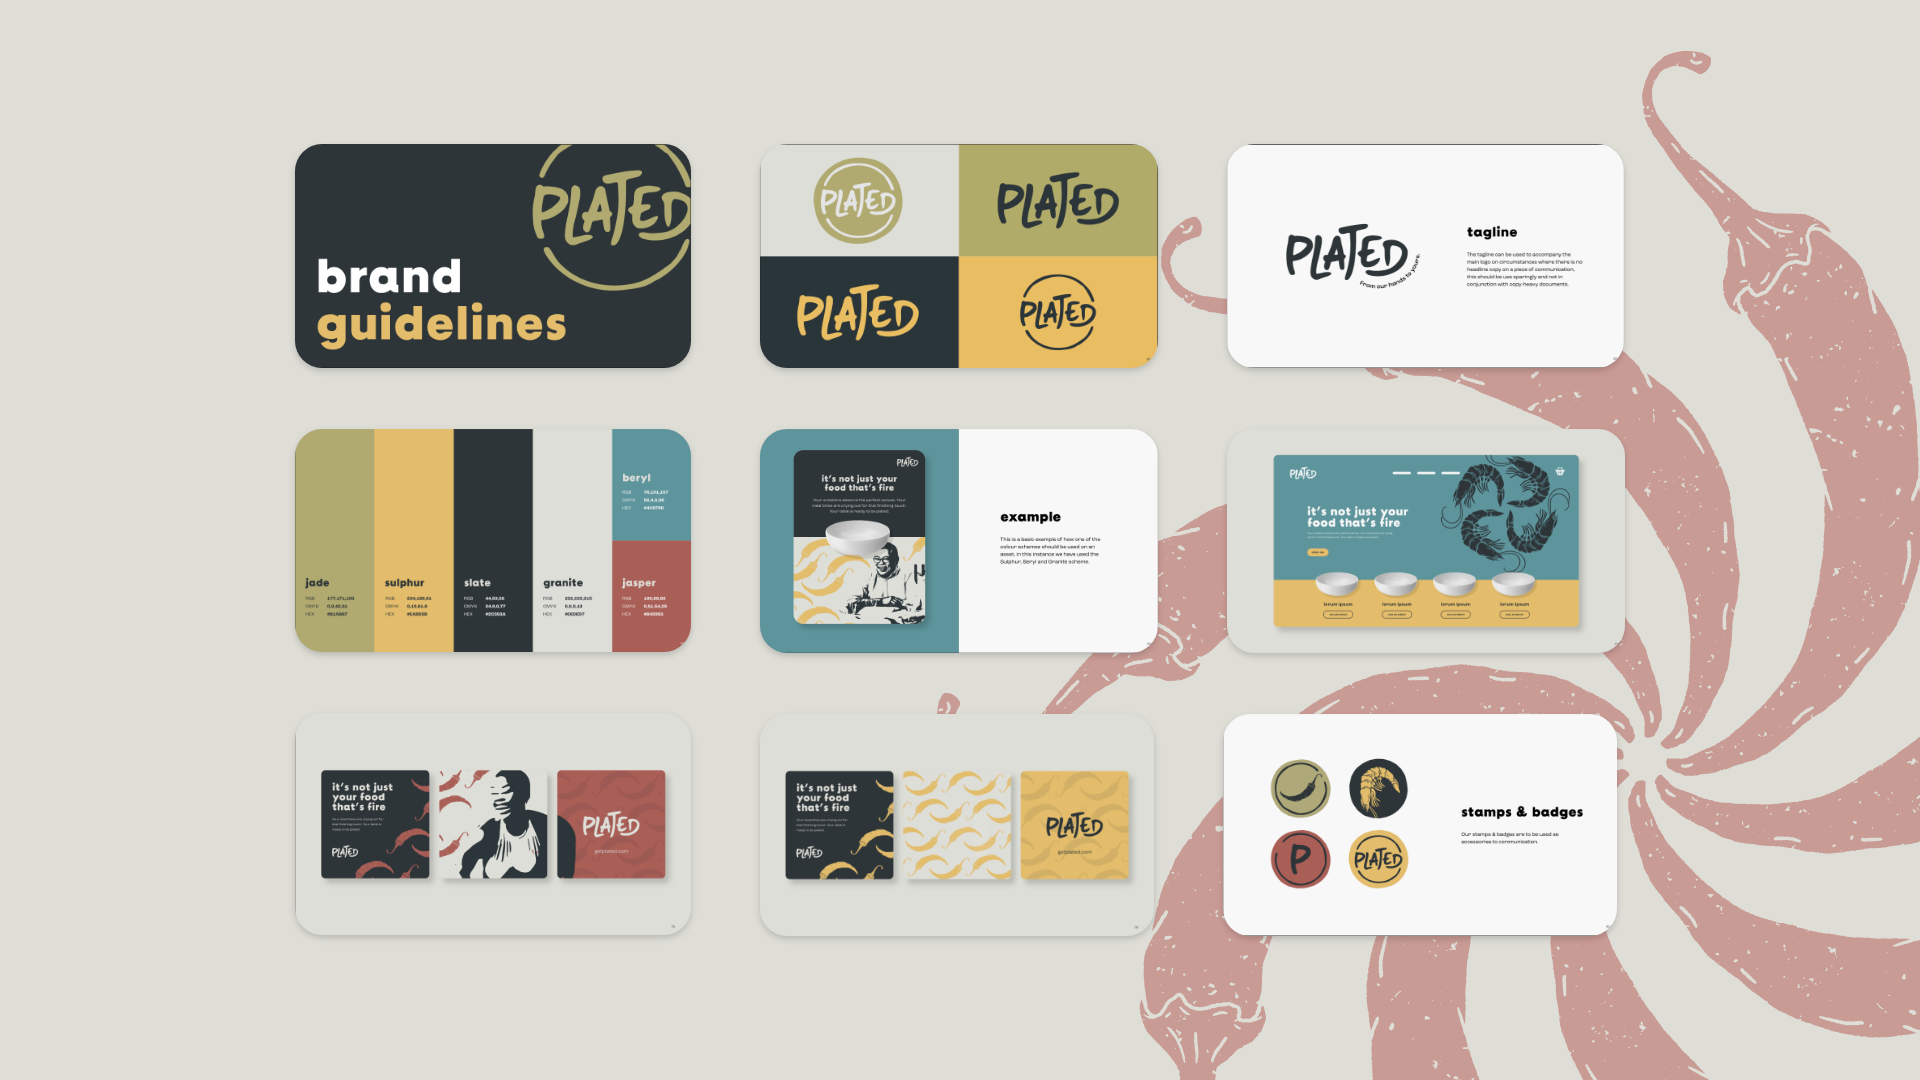 Plated brand guidelines